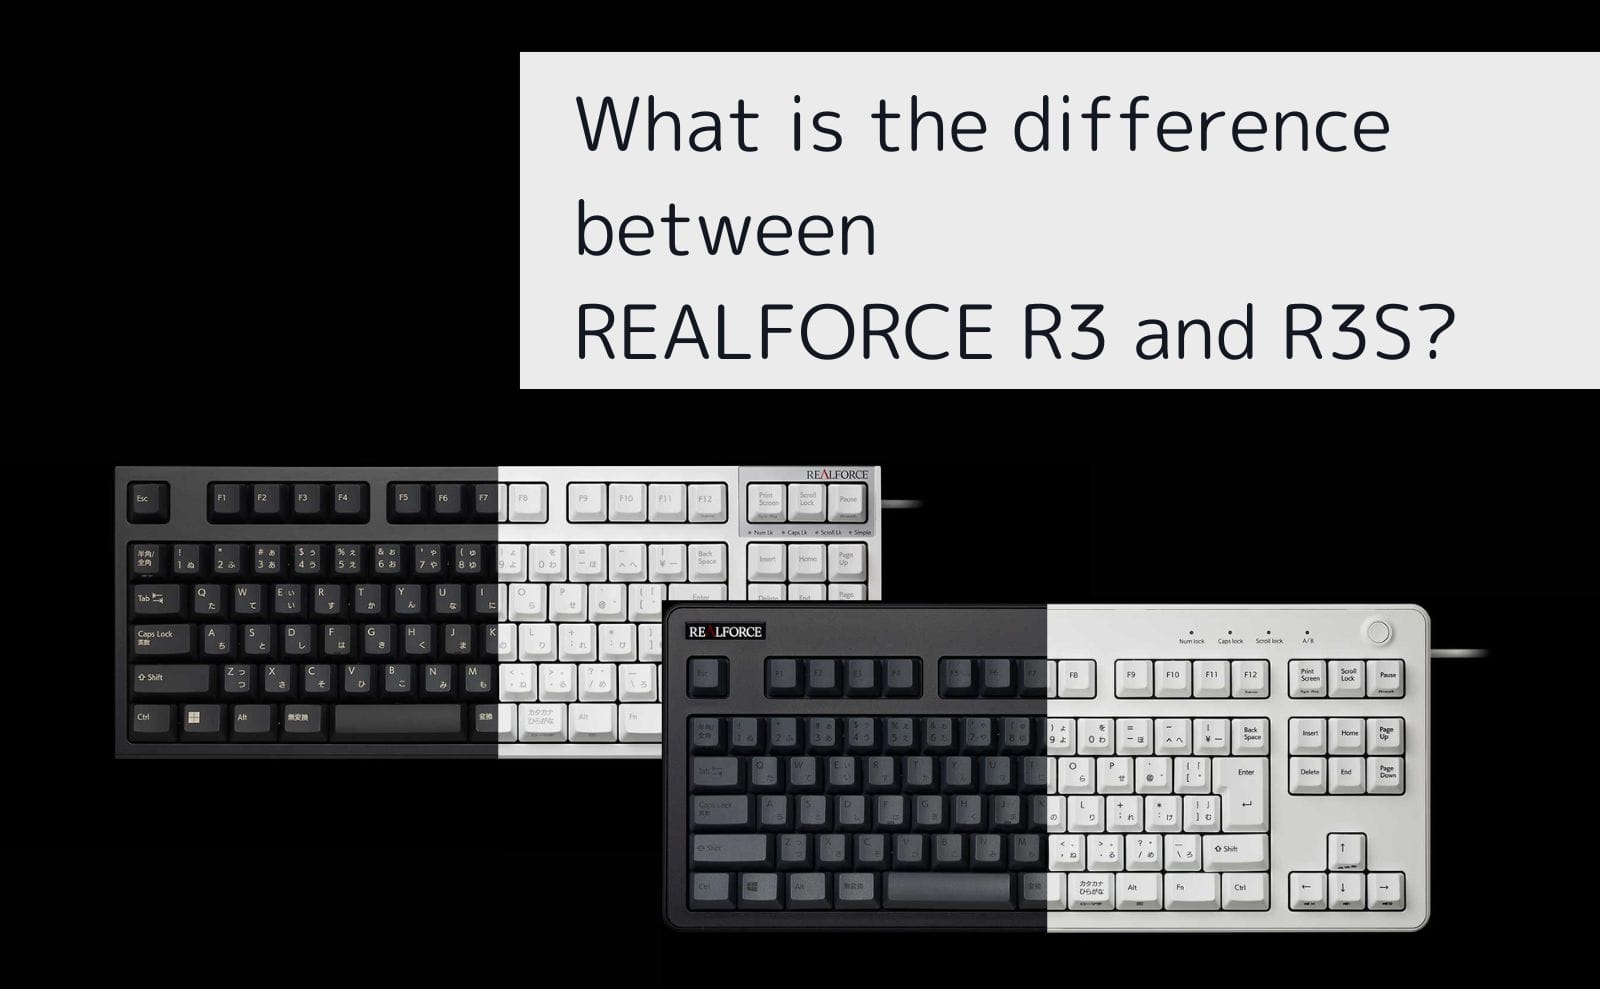 What is the difference between REALFORCE R3 and R3S? Also 